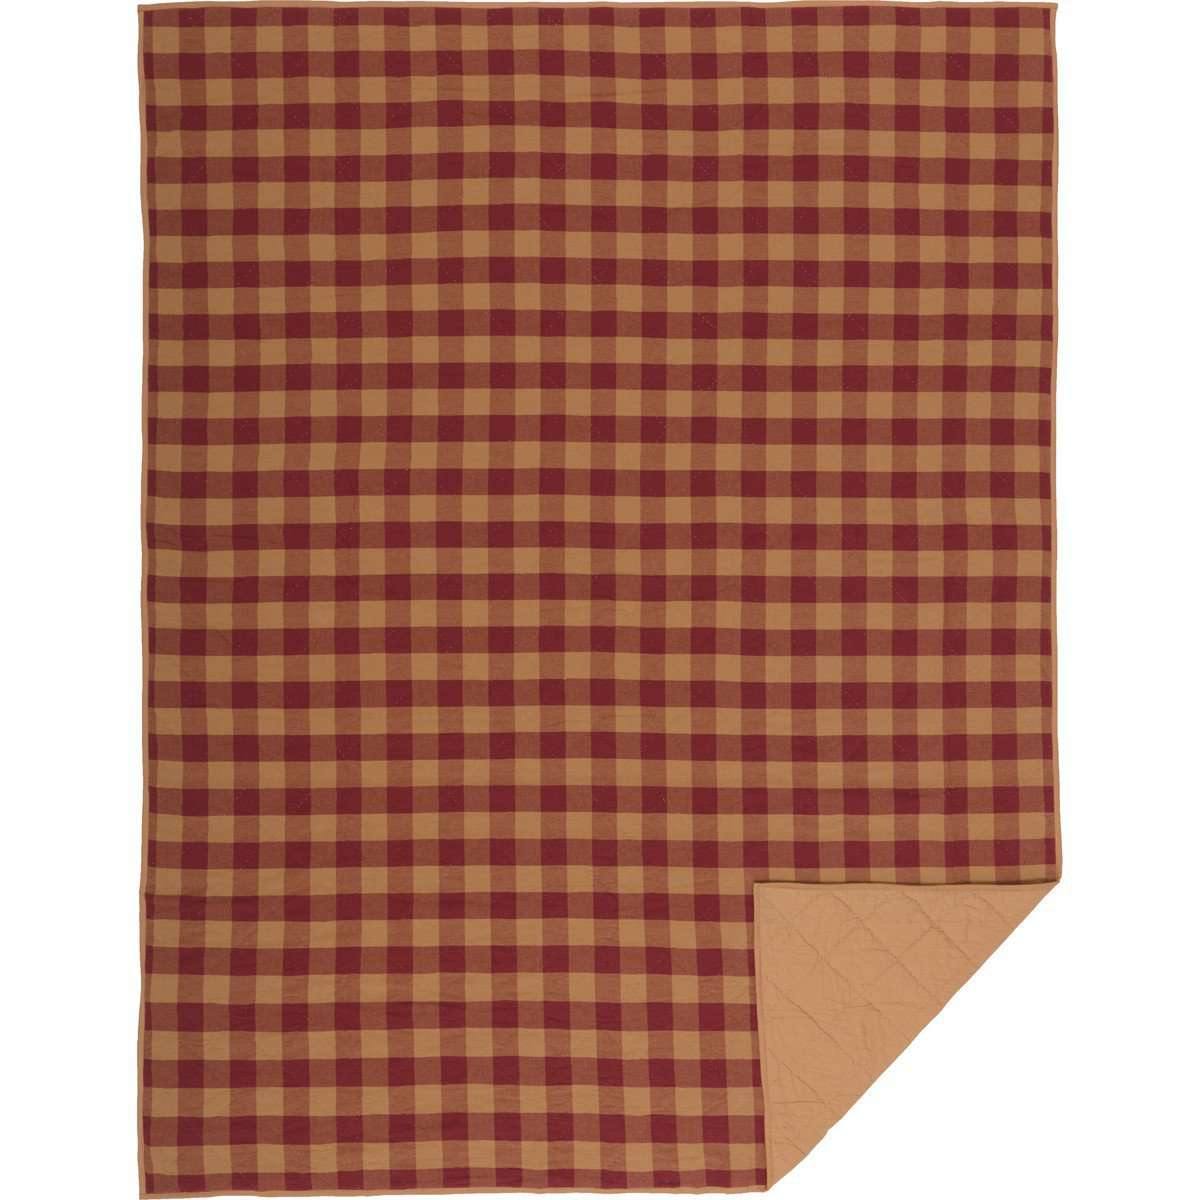 Burgundy Check Quilt Coverlet VHC Brands twin